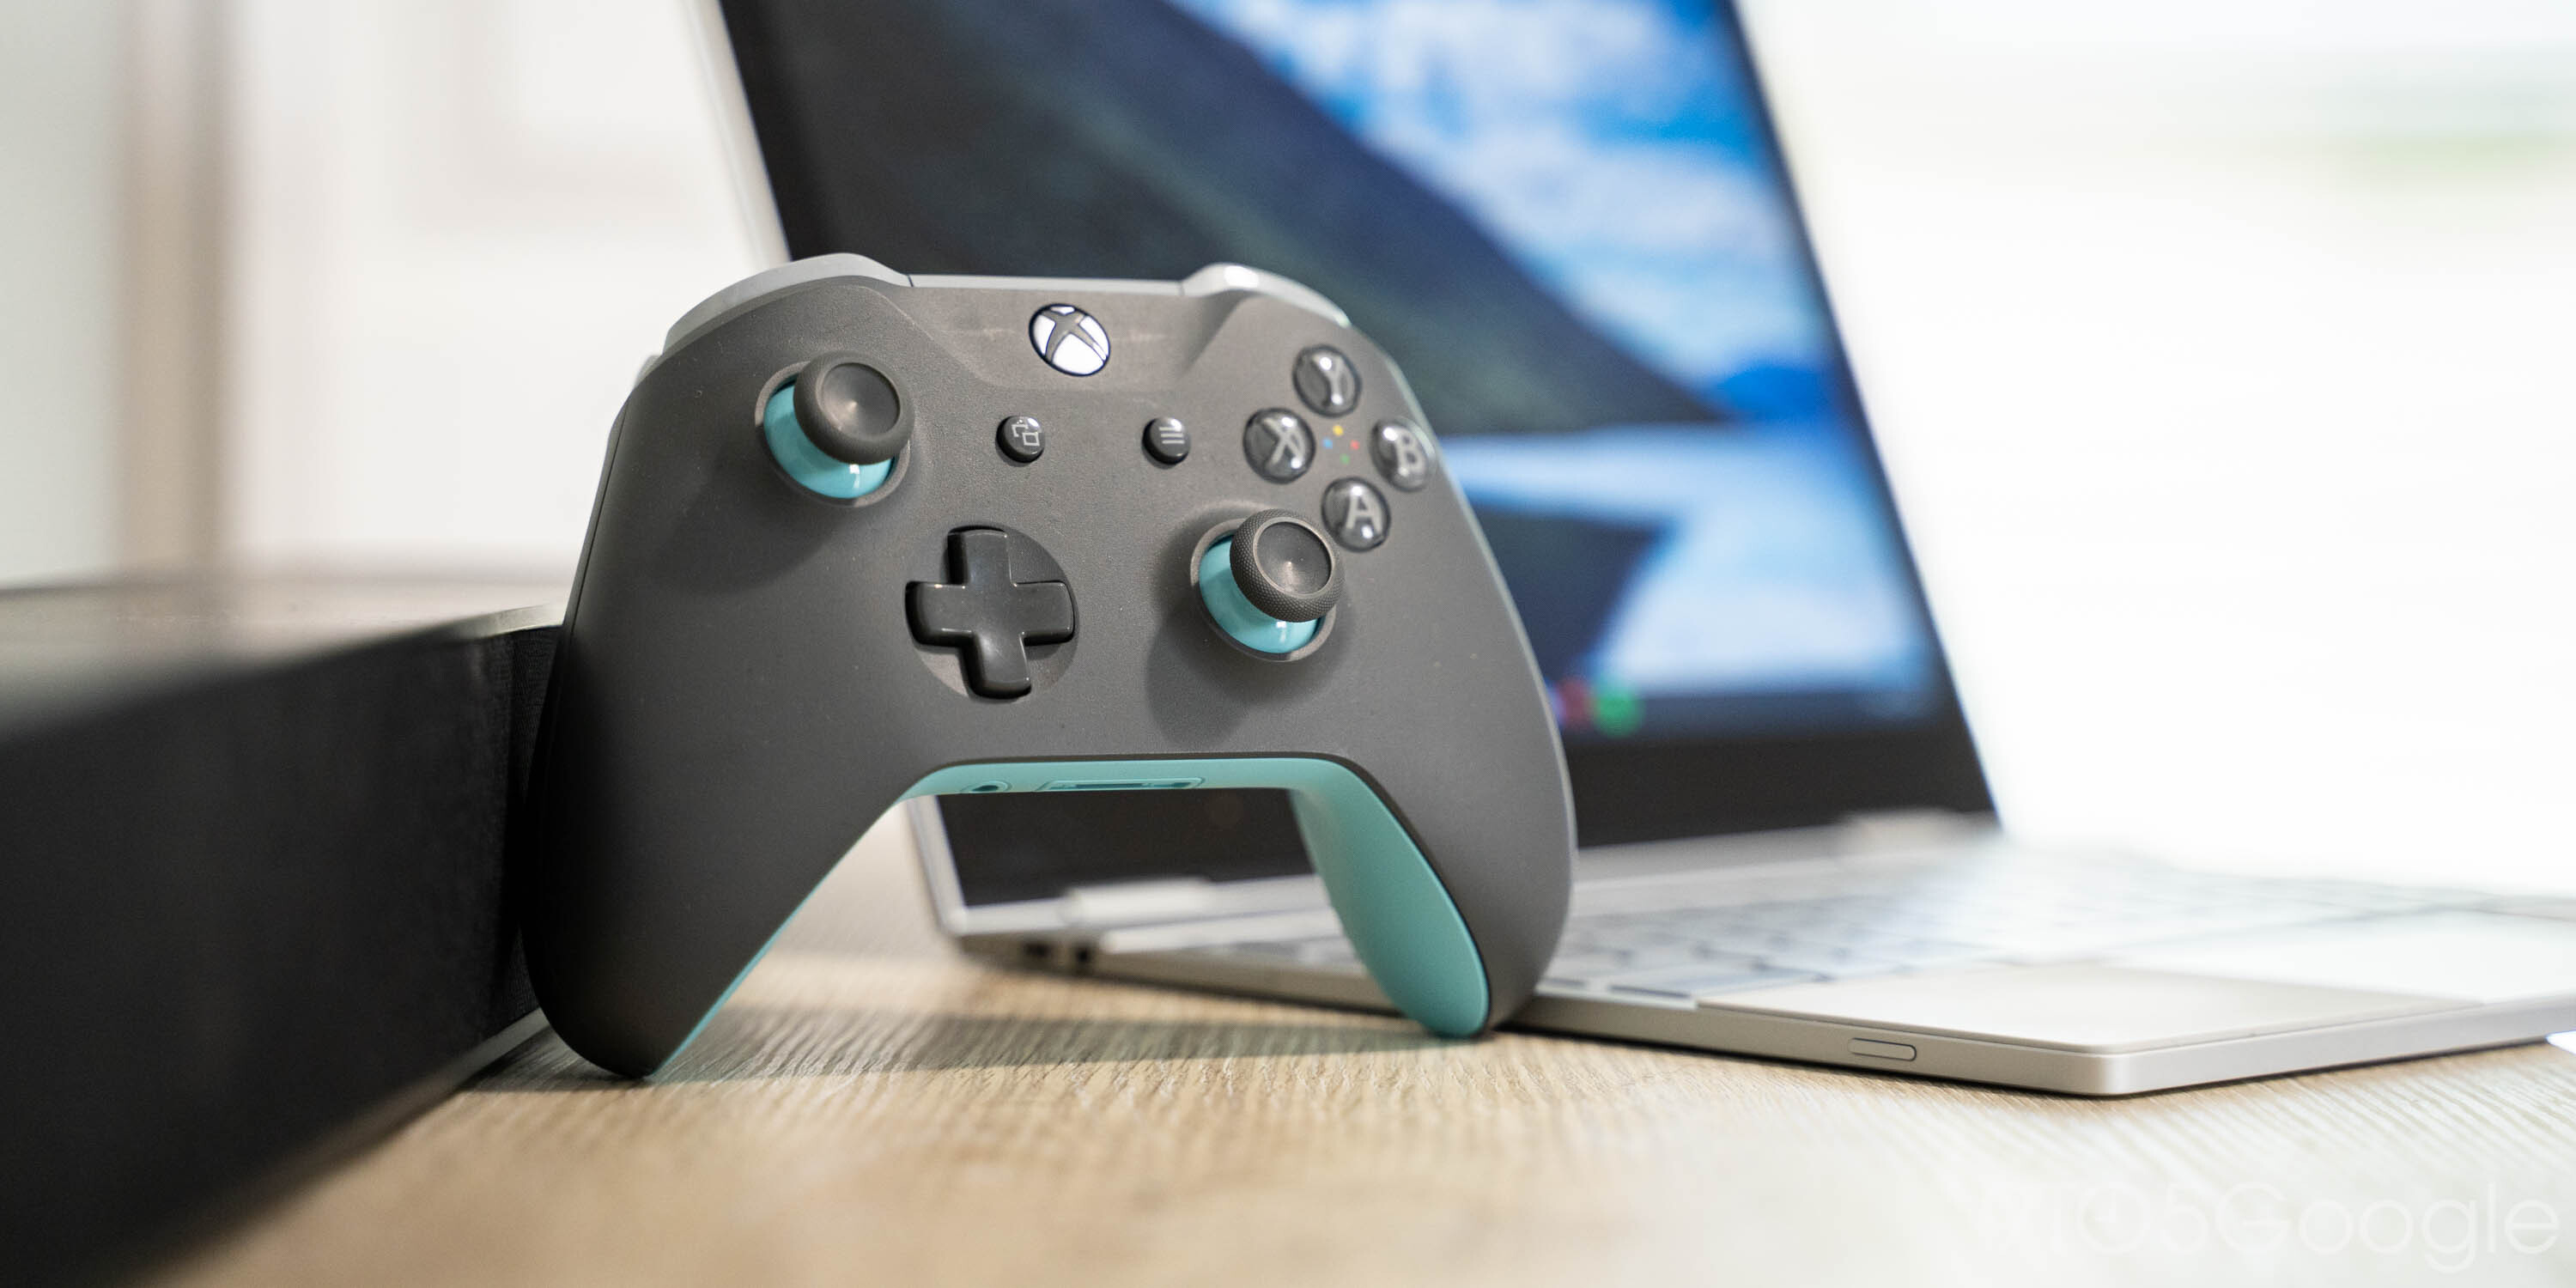 How to play Xbox Game Pass (Cloud Gaming) on Chromebooks